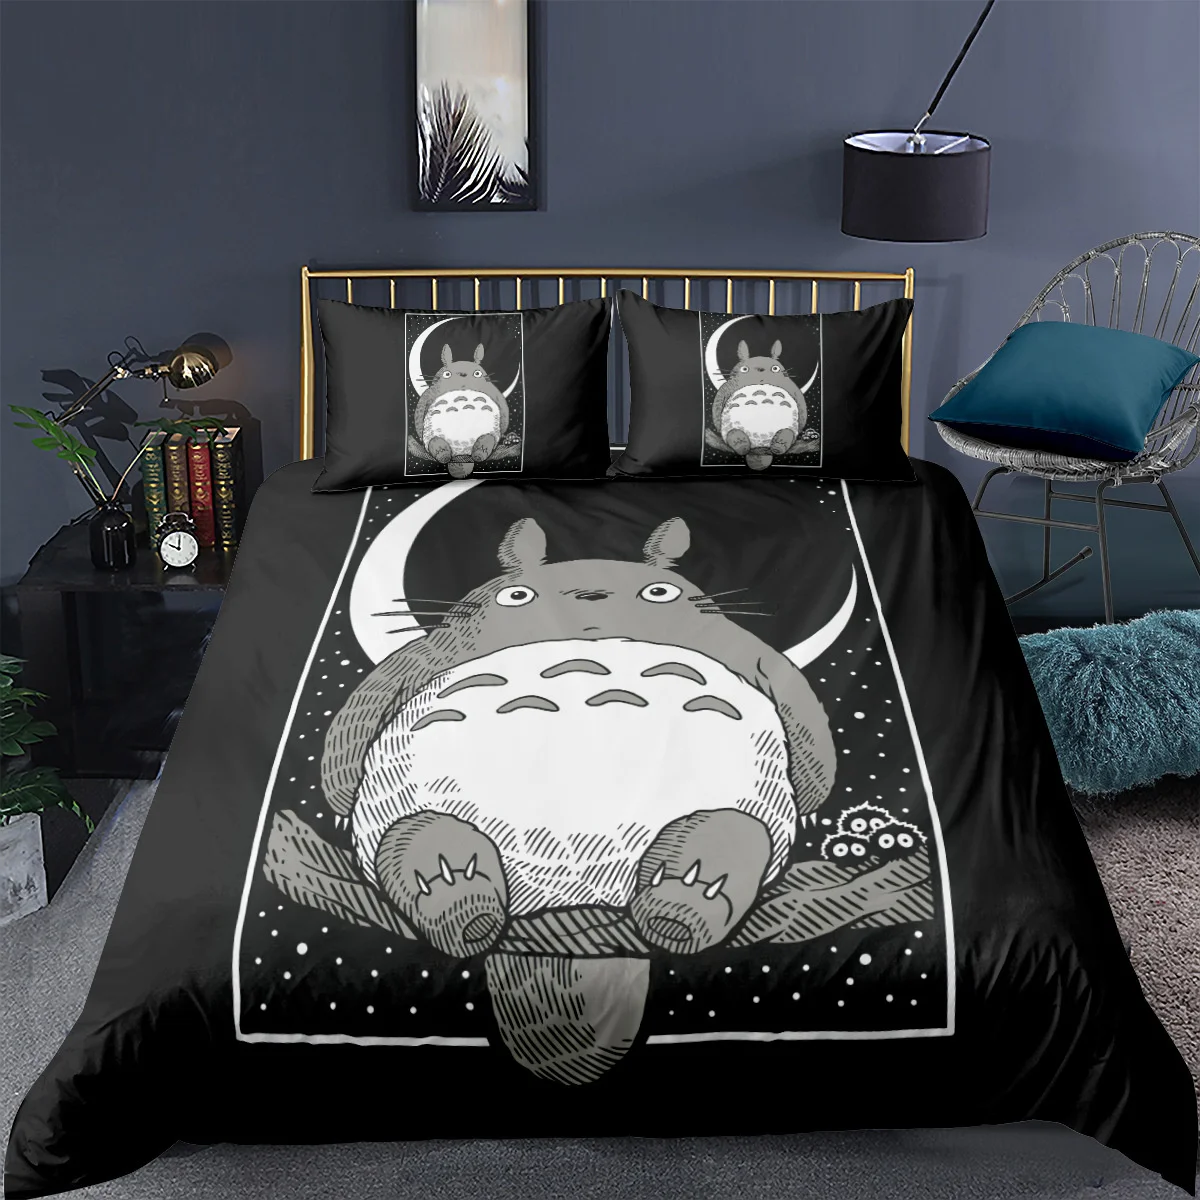 

My Neighbor Totoro Bedding Set Cartoon Kids Gift Anime Bed Linen Quilt Duvet Cover Sets Home Decor Twin Single Queen King Size